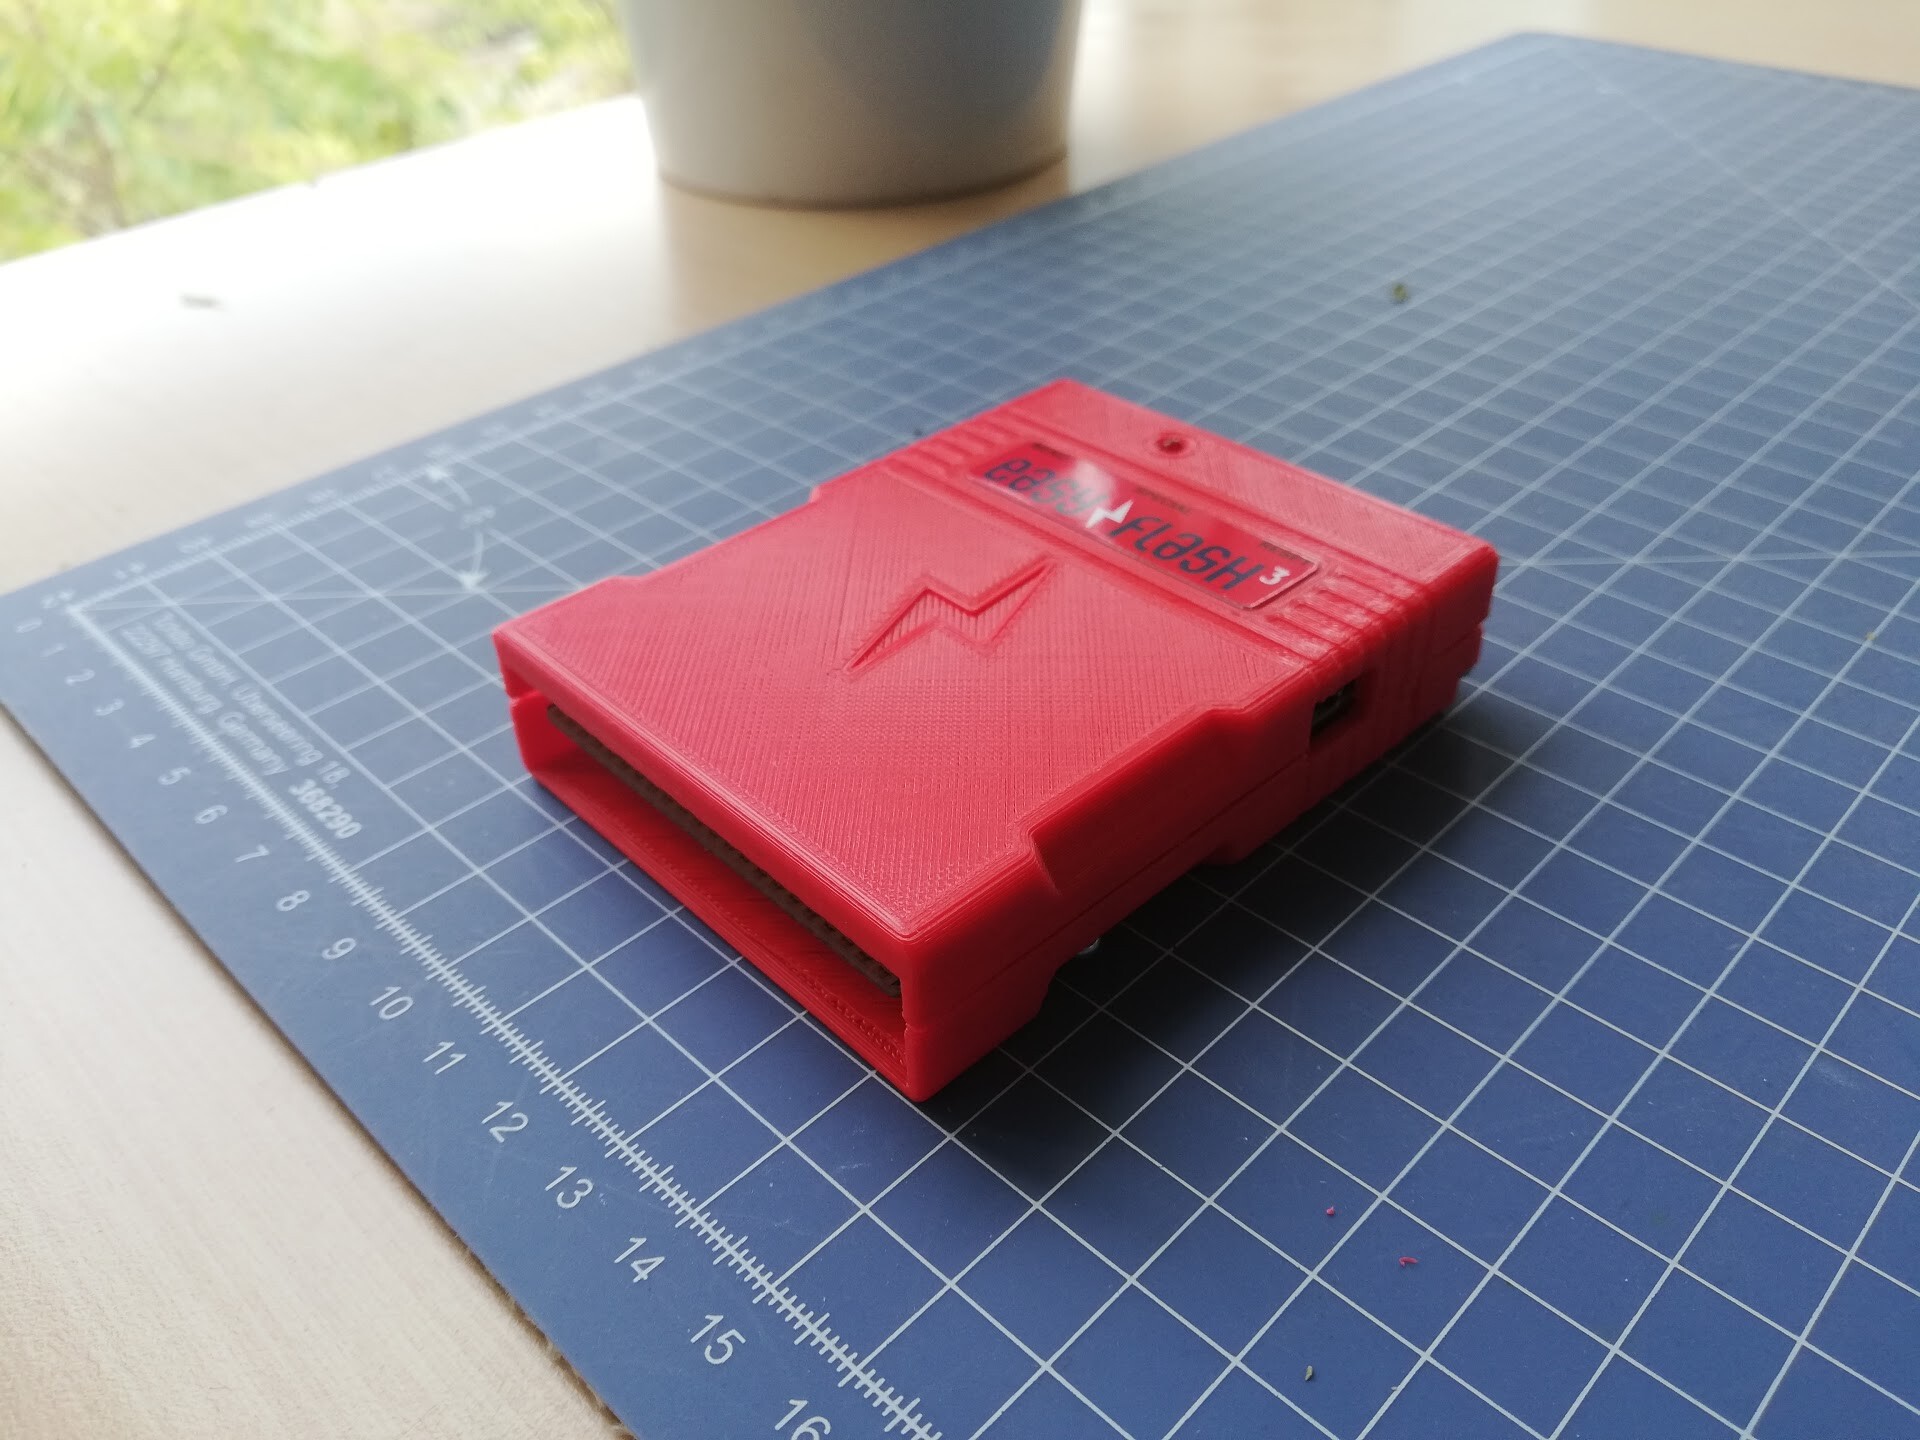 SD NINTENDO SWITCH COMPACT FLASH CARD WALLET 3D model 3D printable